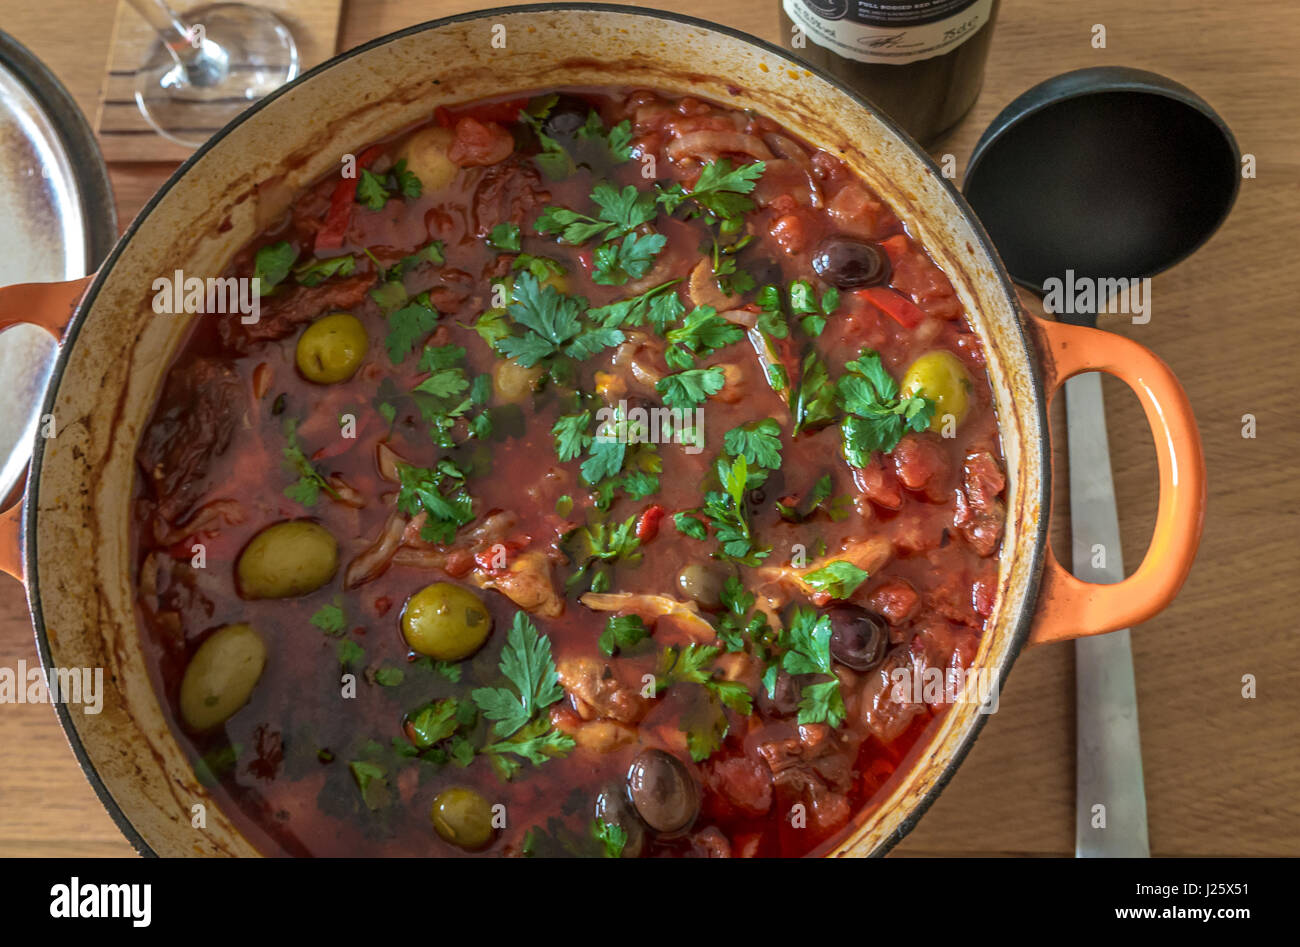 Large cast iron pot filled with Spanish stew, olives, chicken, potatoes, coriander, parsley, sun dried tomatoes, served on oak table with ladle Stock Photo